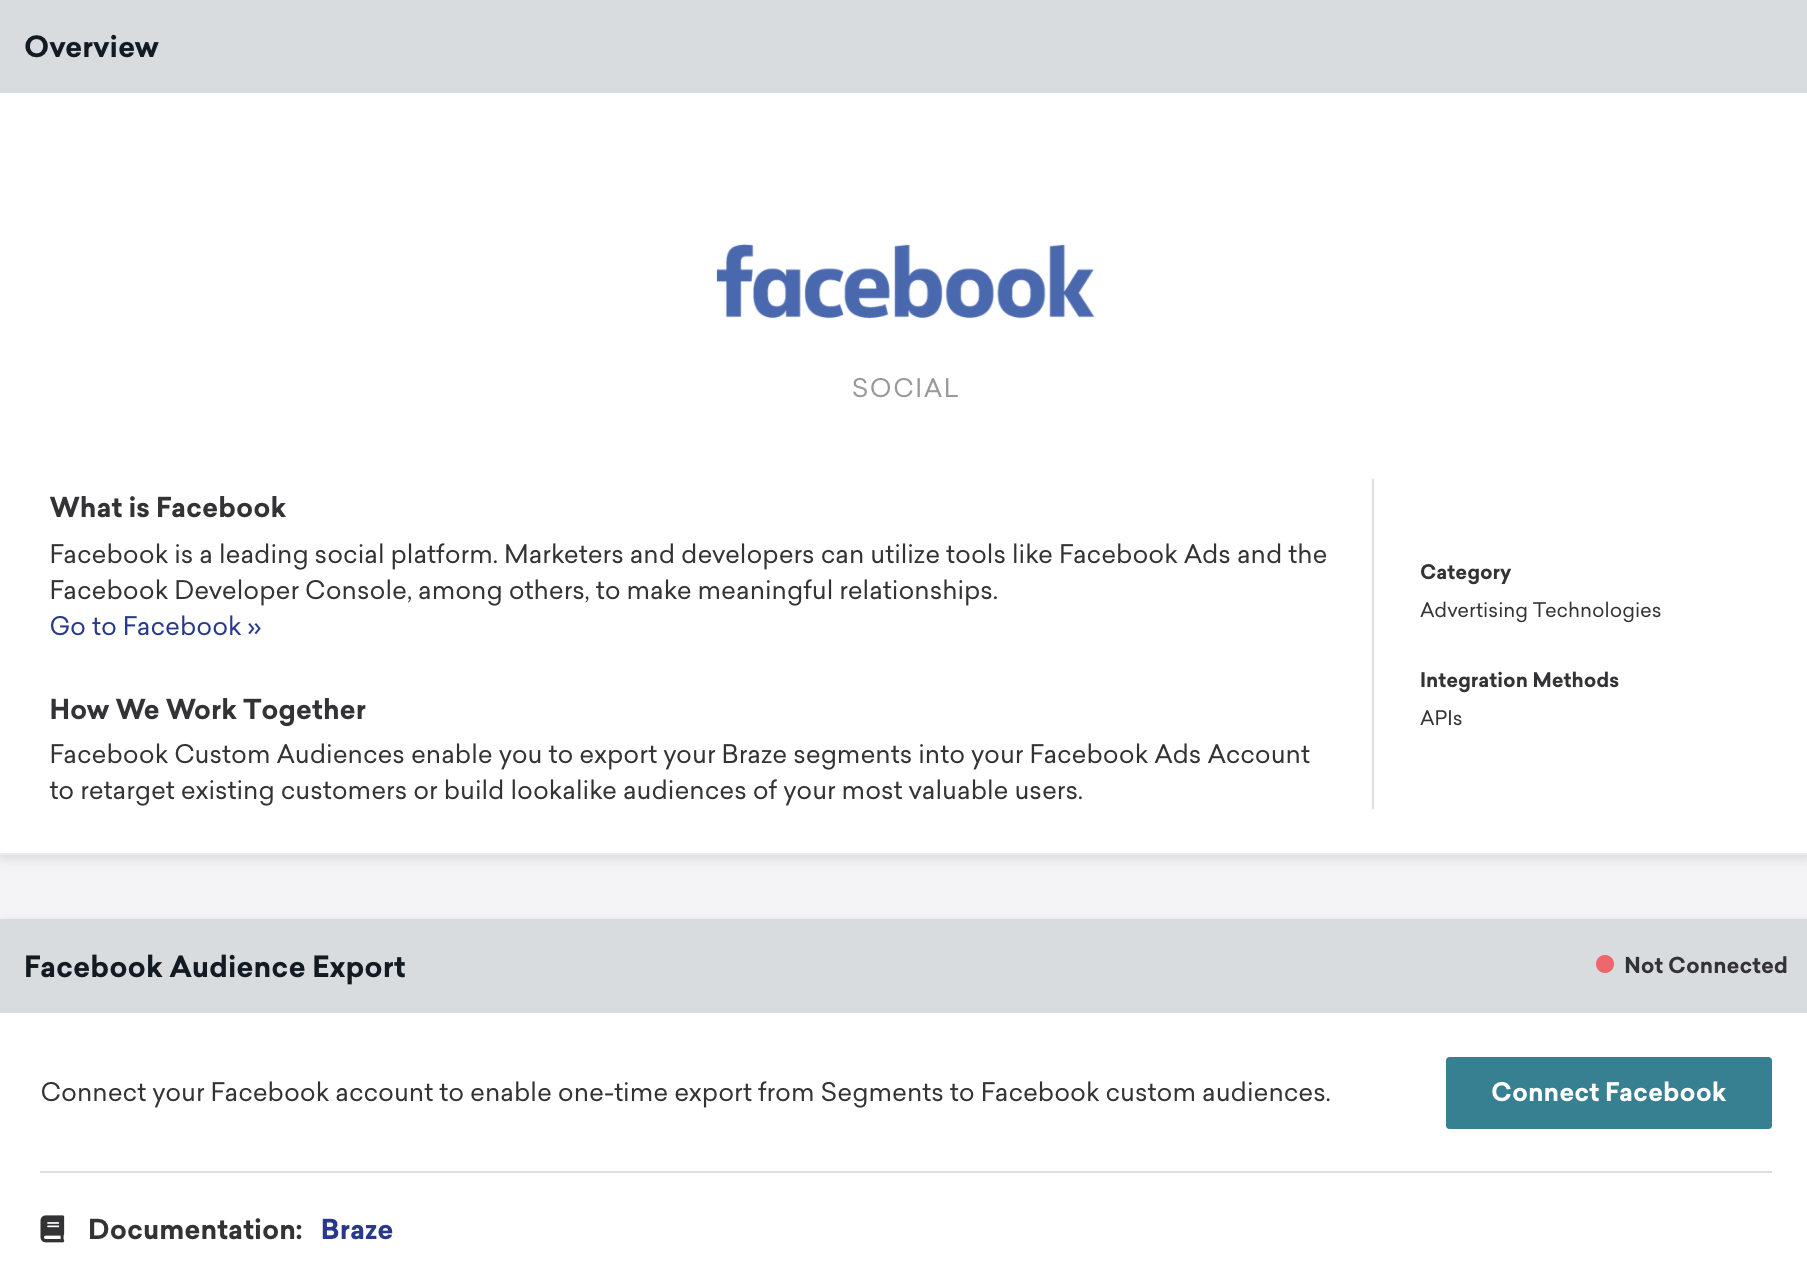 Facebook technology partners page in the Braze platform.